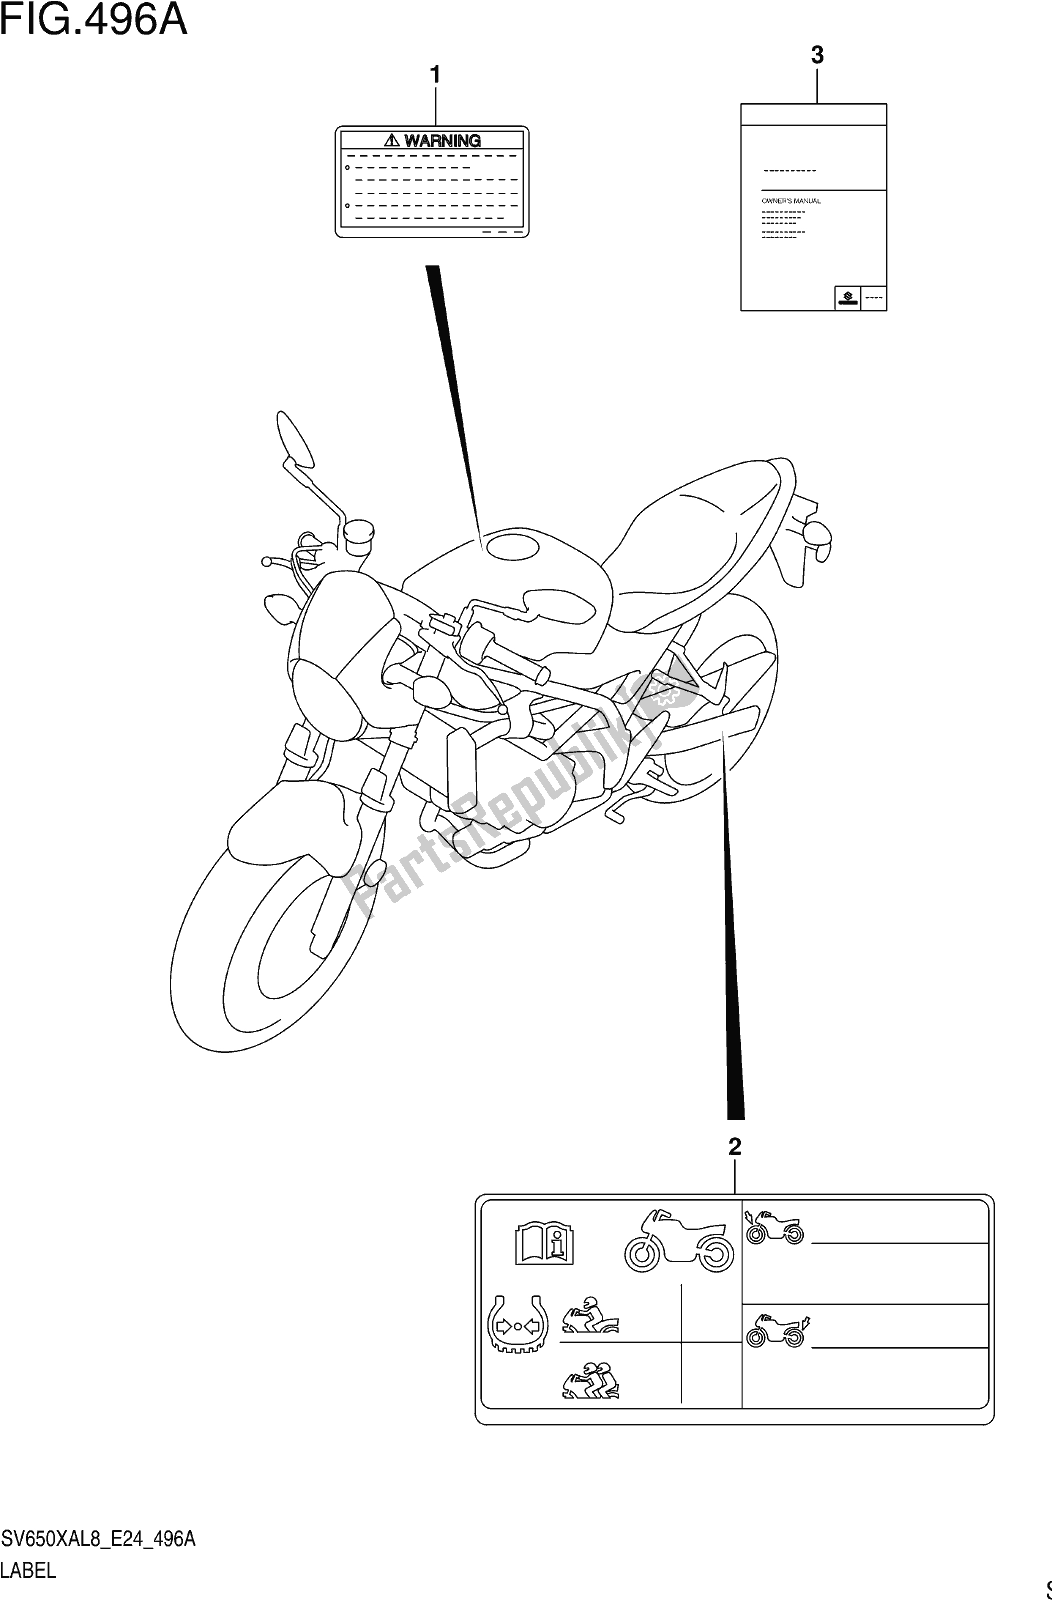 All parts for the Fig. 496a Label of the Suzuki SV 650 XA 2018